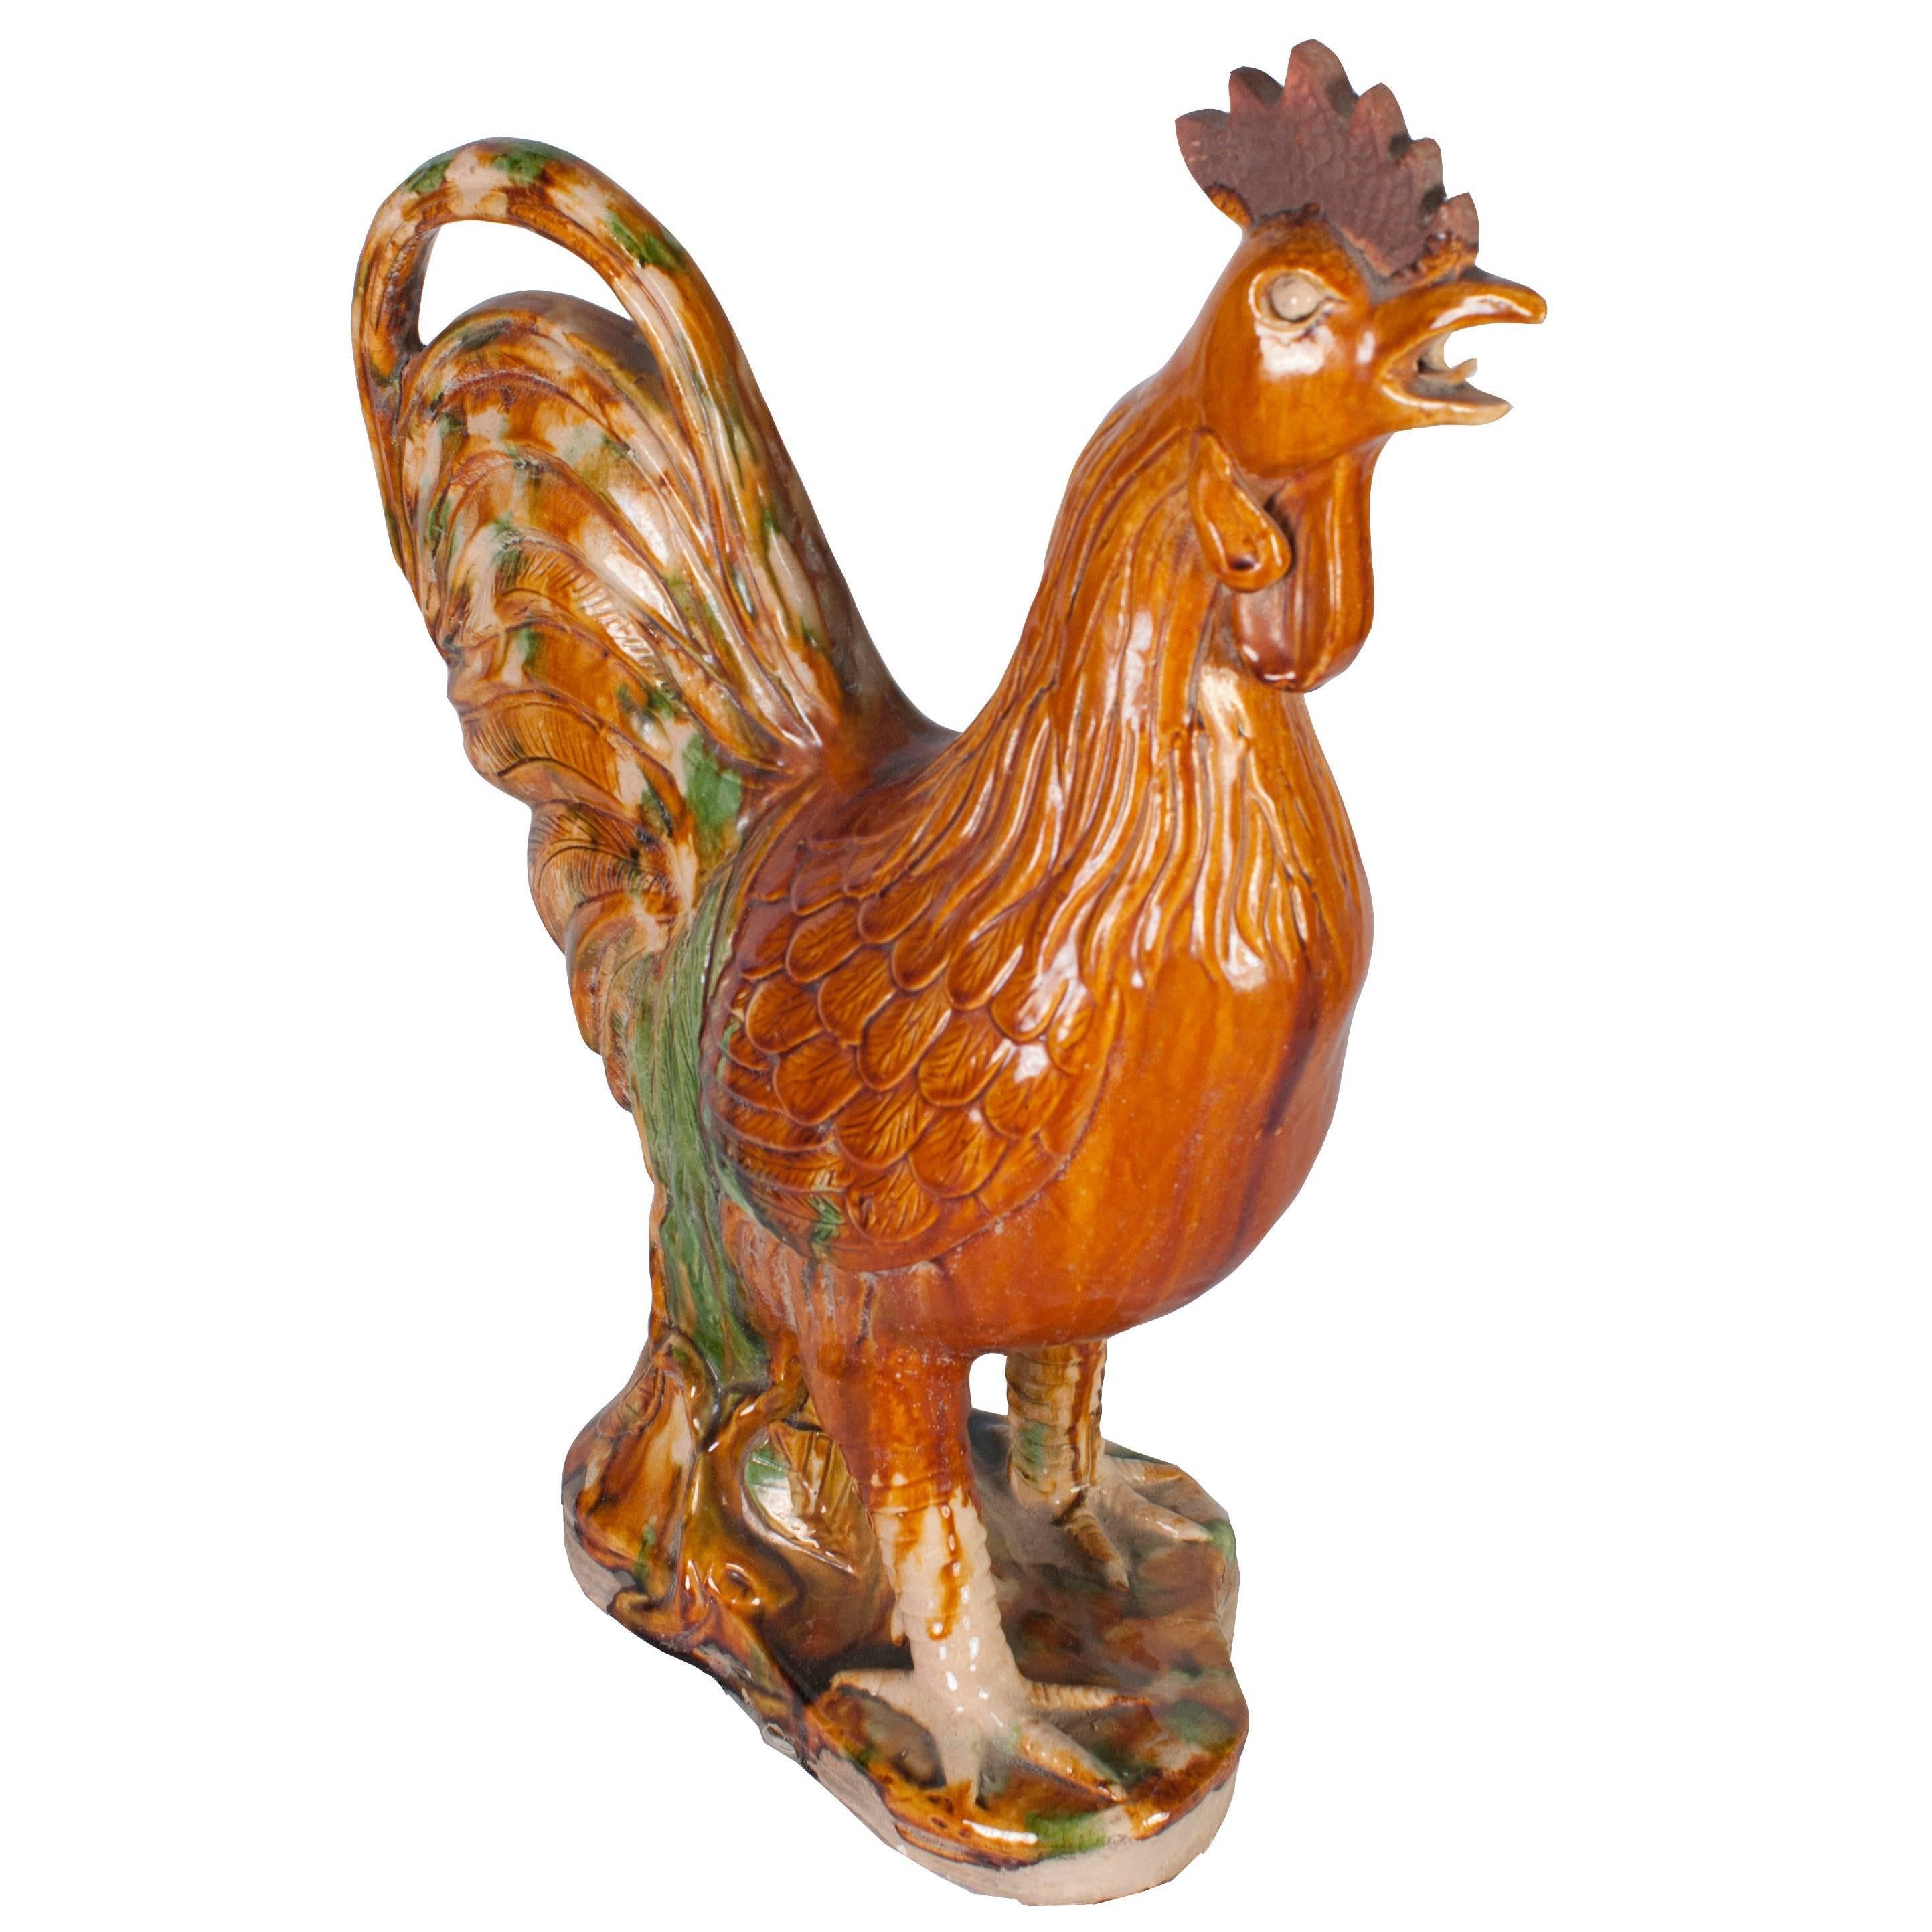 Painted Terra Cotta Rooster